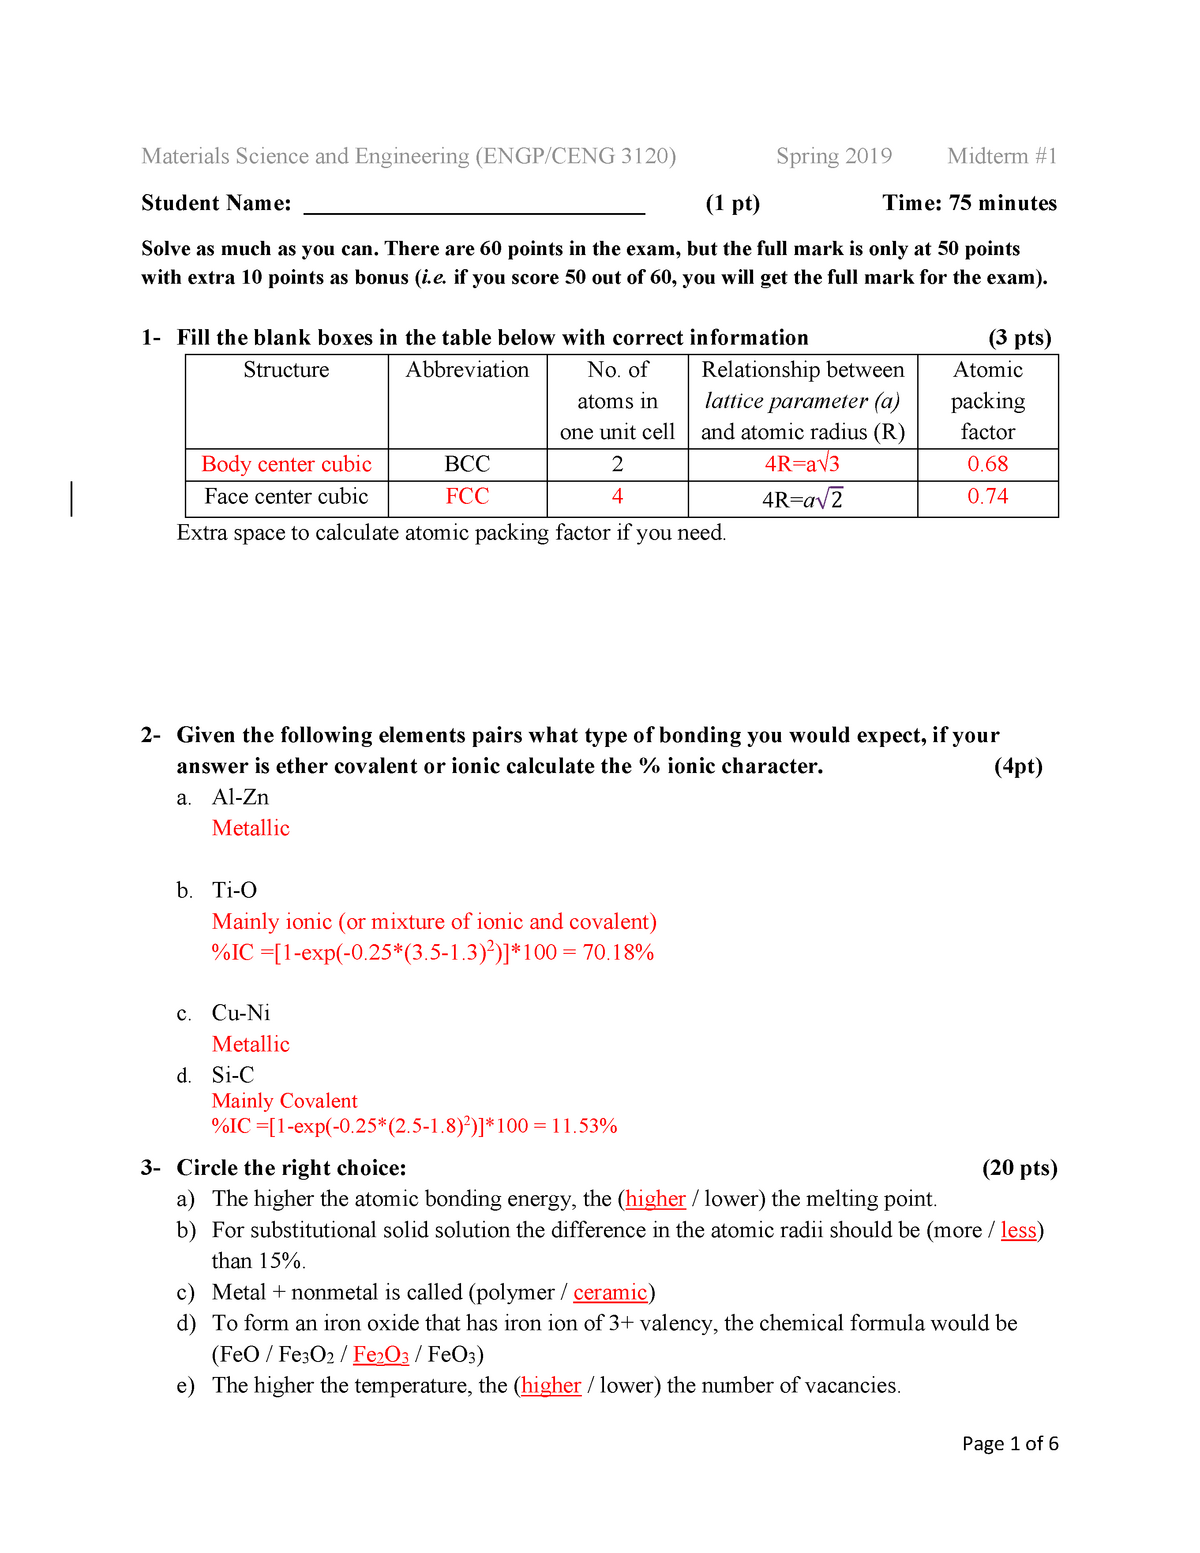 midterm-1-2019-answers-exam-1-with-questions-and-solutions-2019